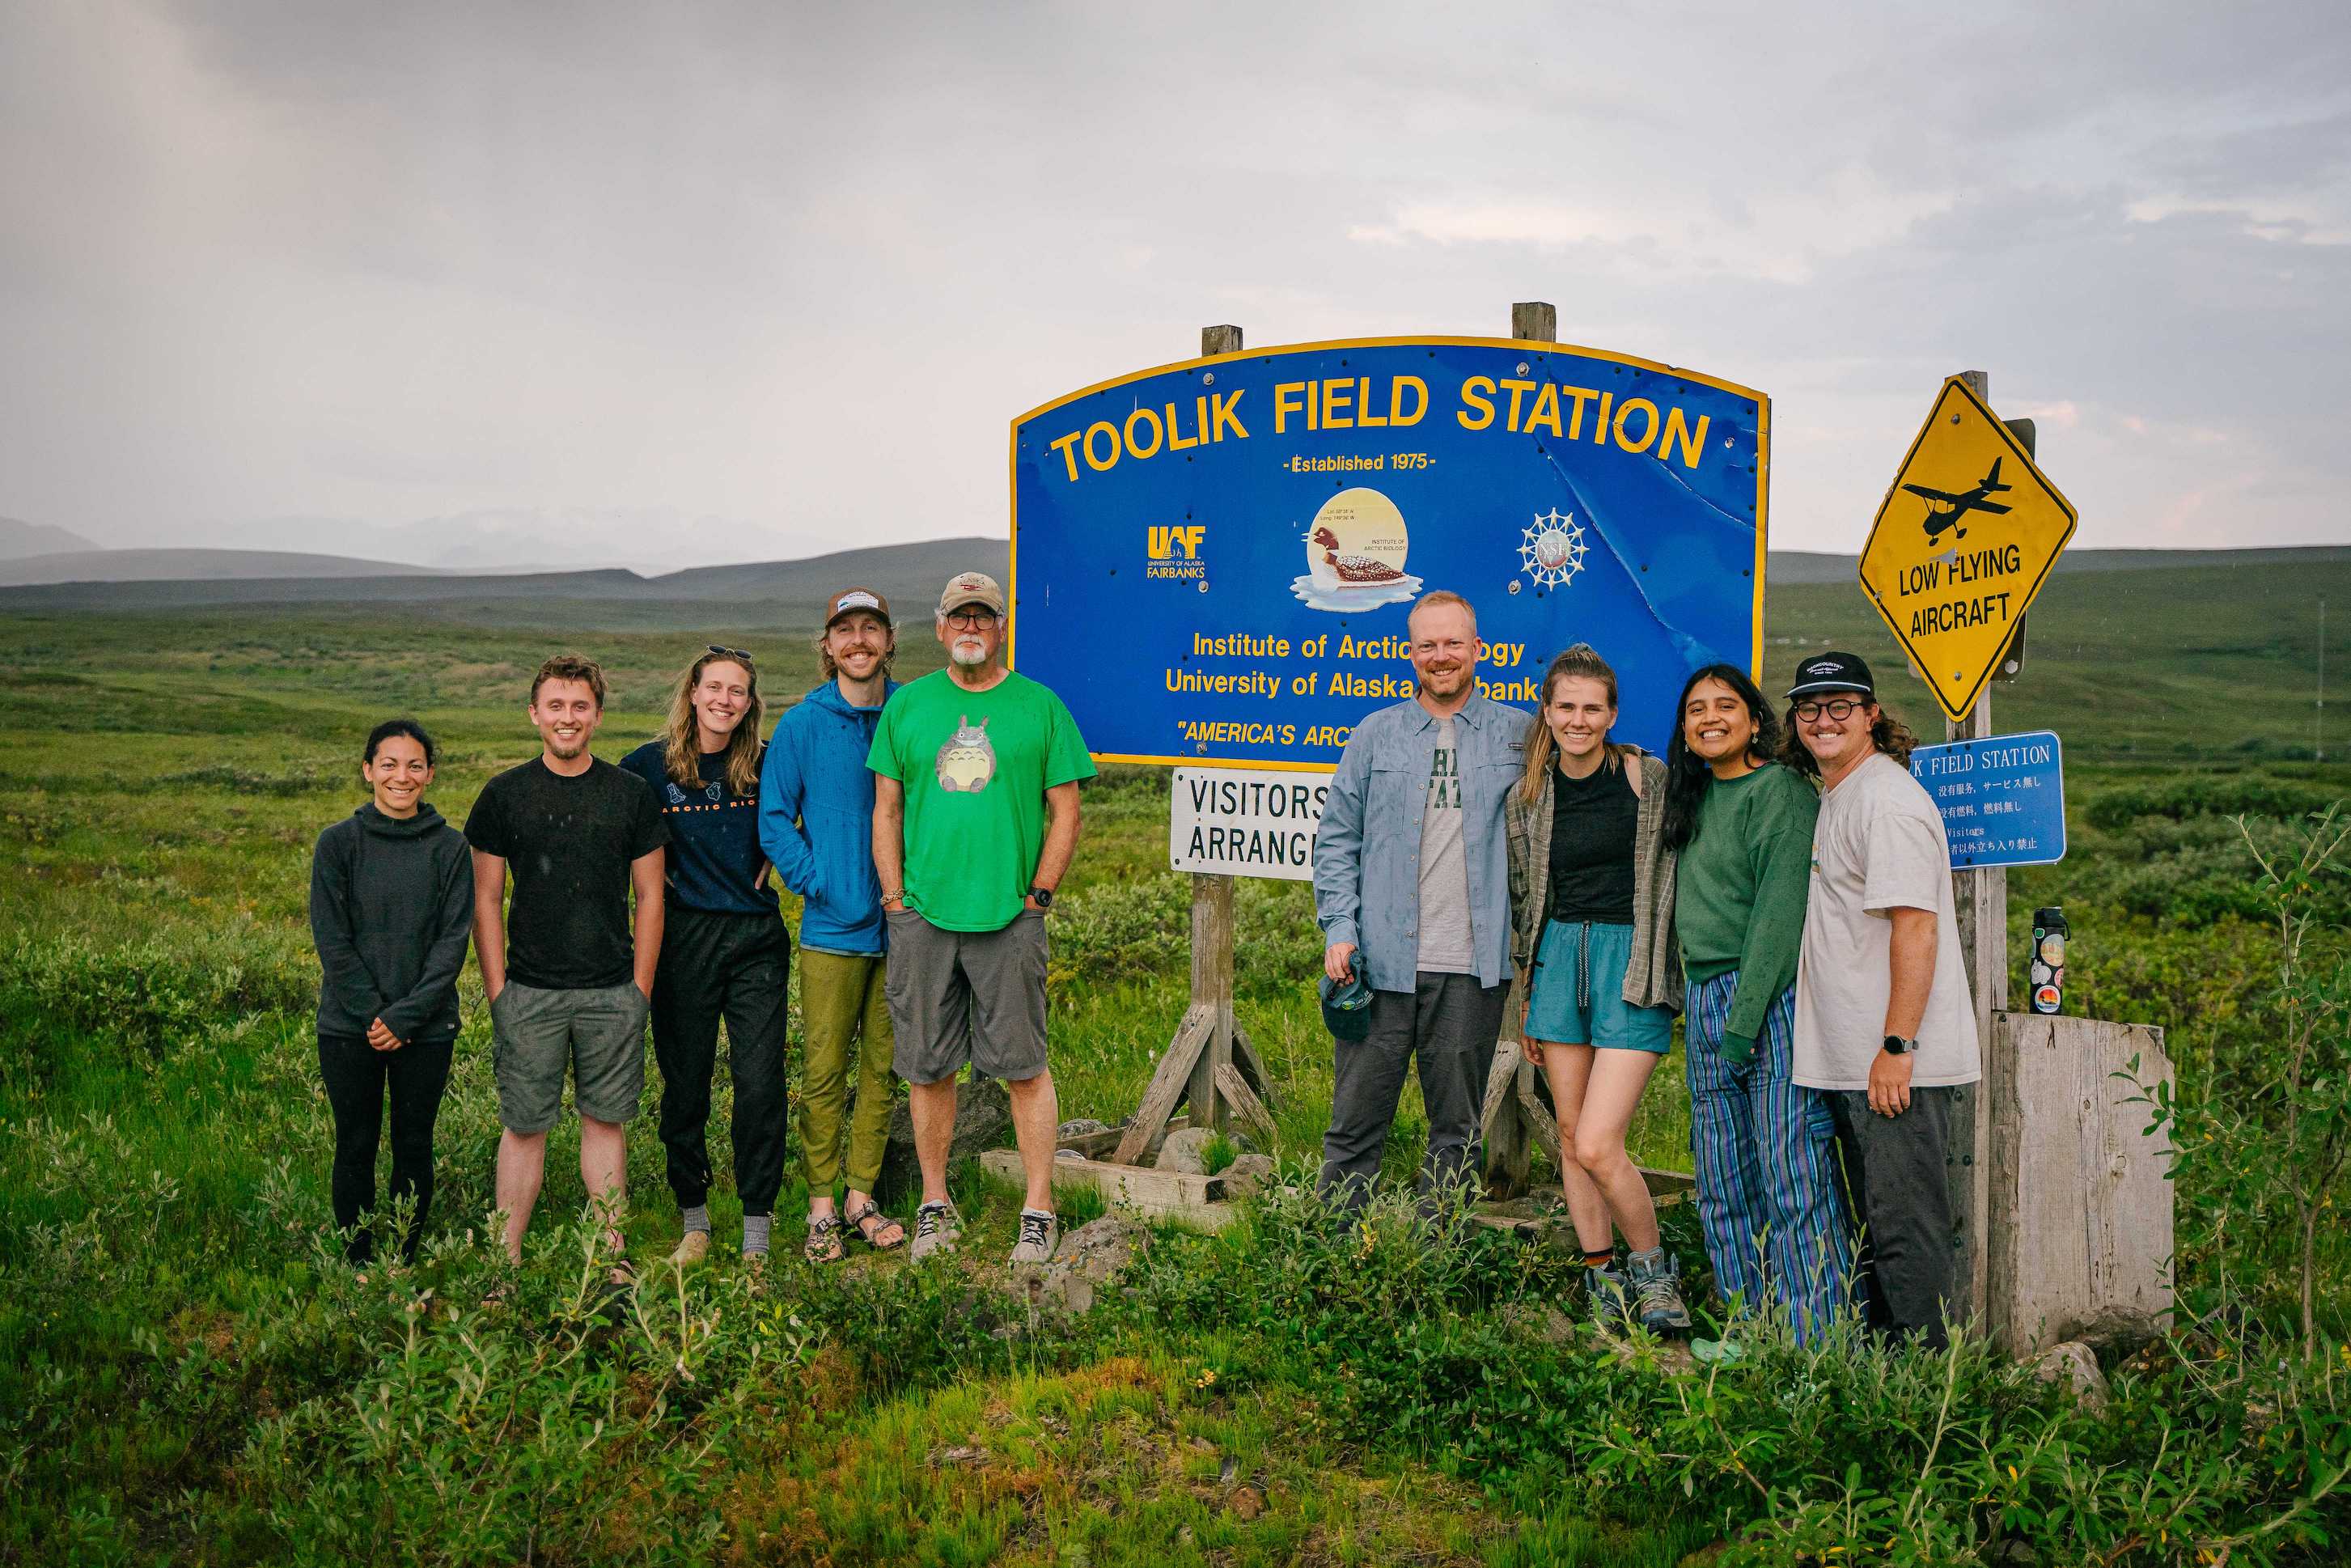 Photo by Jansen Nipko
The Arctic RIOS project team (from left to right), Arial Shogren, Jackson VerSteeg, Abigail Rec, Paden Allsup, Breck Bowden, Jay Zarnetske, Amelia Grose, Valeria Prieto, and Jansen Nipko, stand by the Toolik Field Station sign during their final field season in summer 2023.